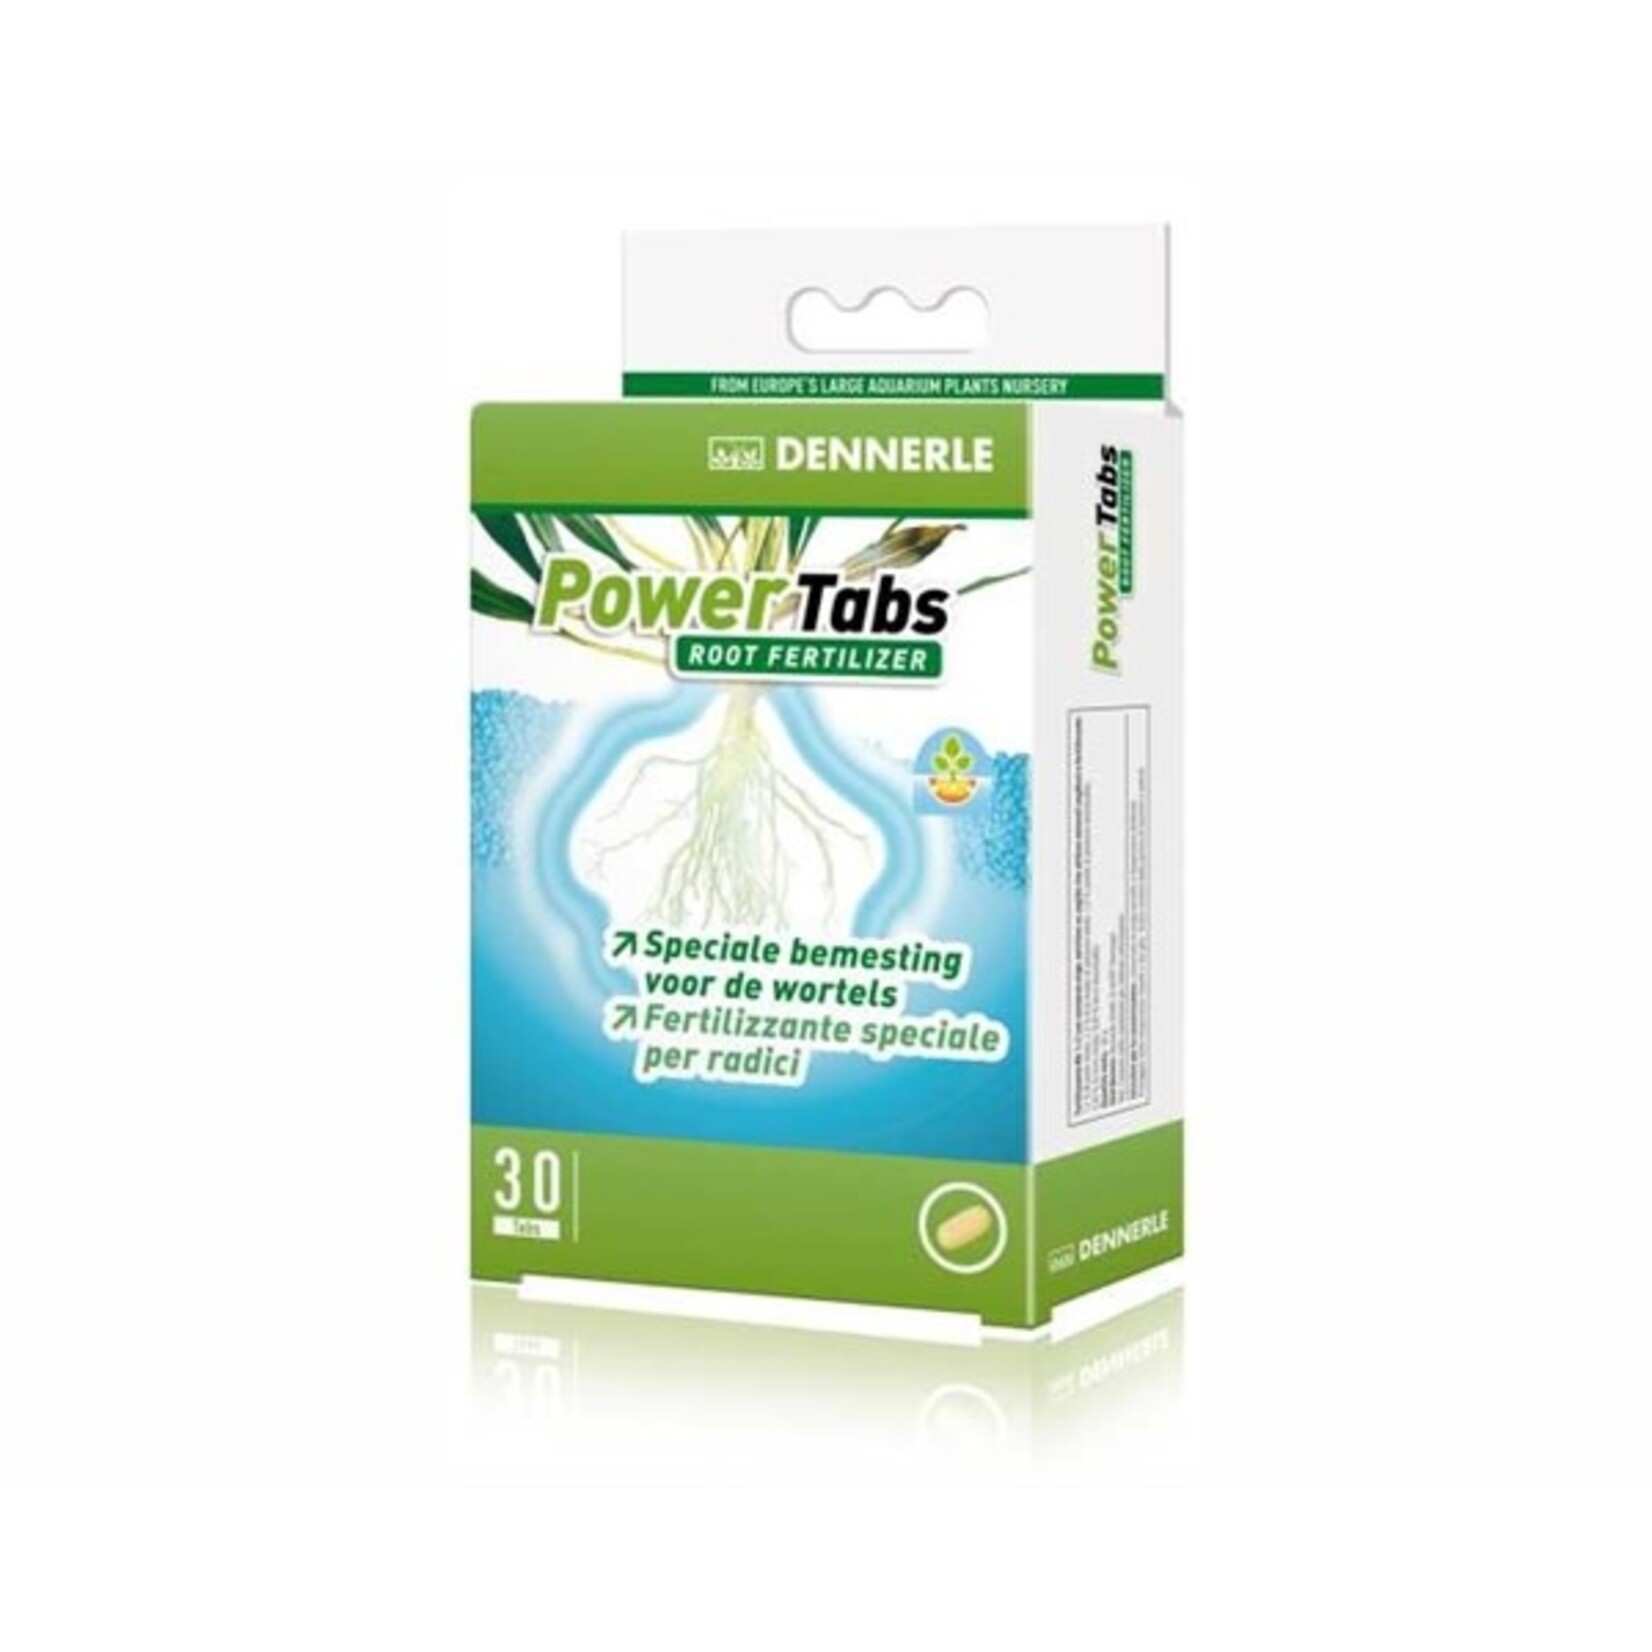 Dennerle power tabs 30 st - int